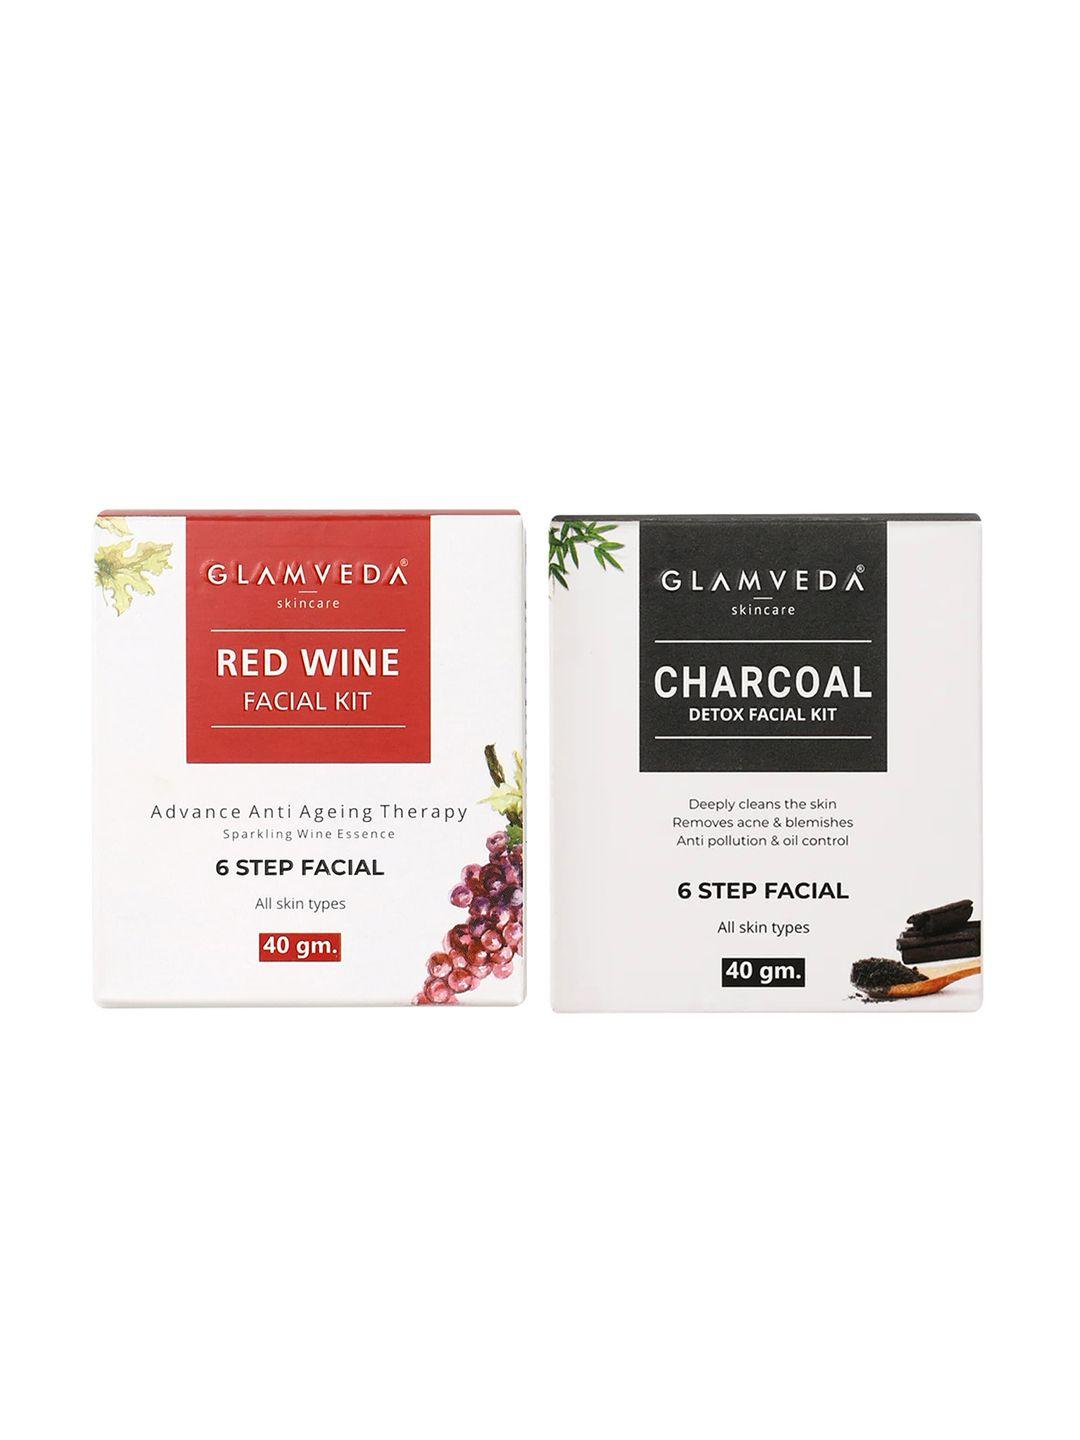 glamveda-set-of-2-red-wine-advance-anti-ageing-&-charcoal-detox-facial-kit-40gm-each